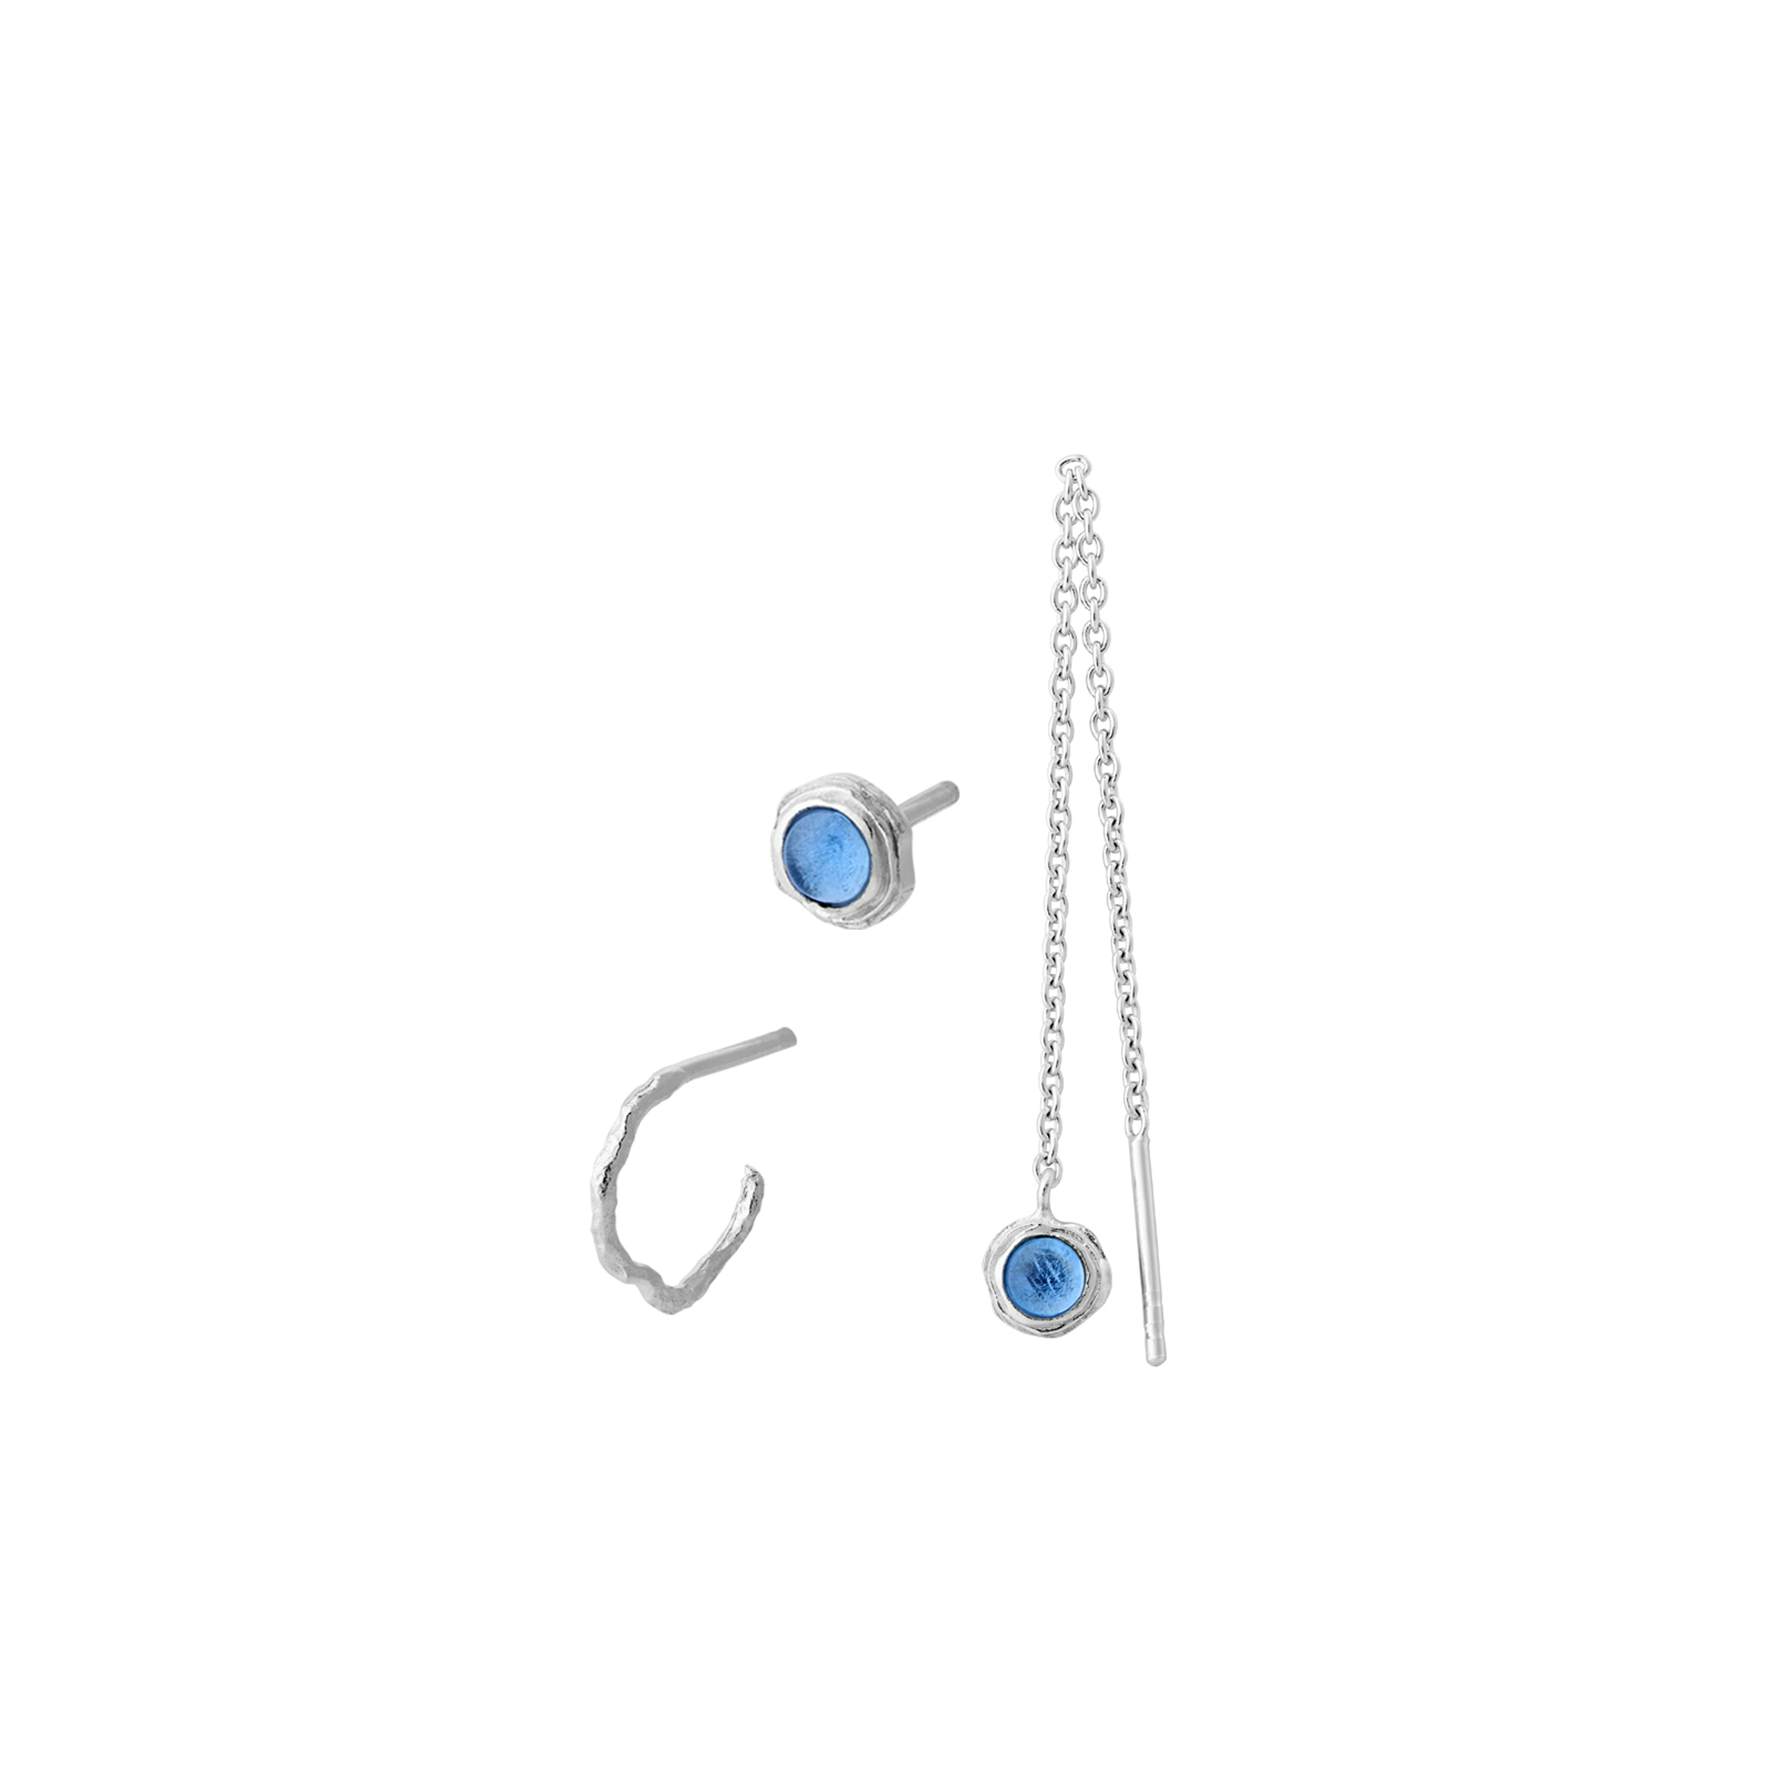 Blue Hour Earring Box from Pernille Corydon in Silver Sterling 925